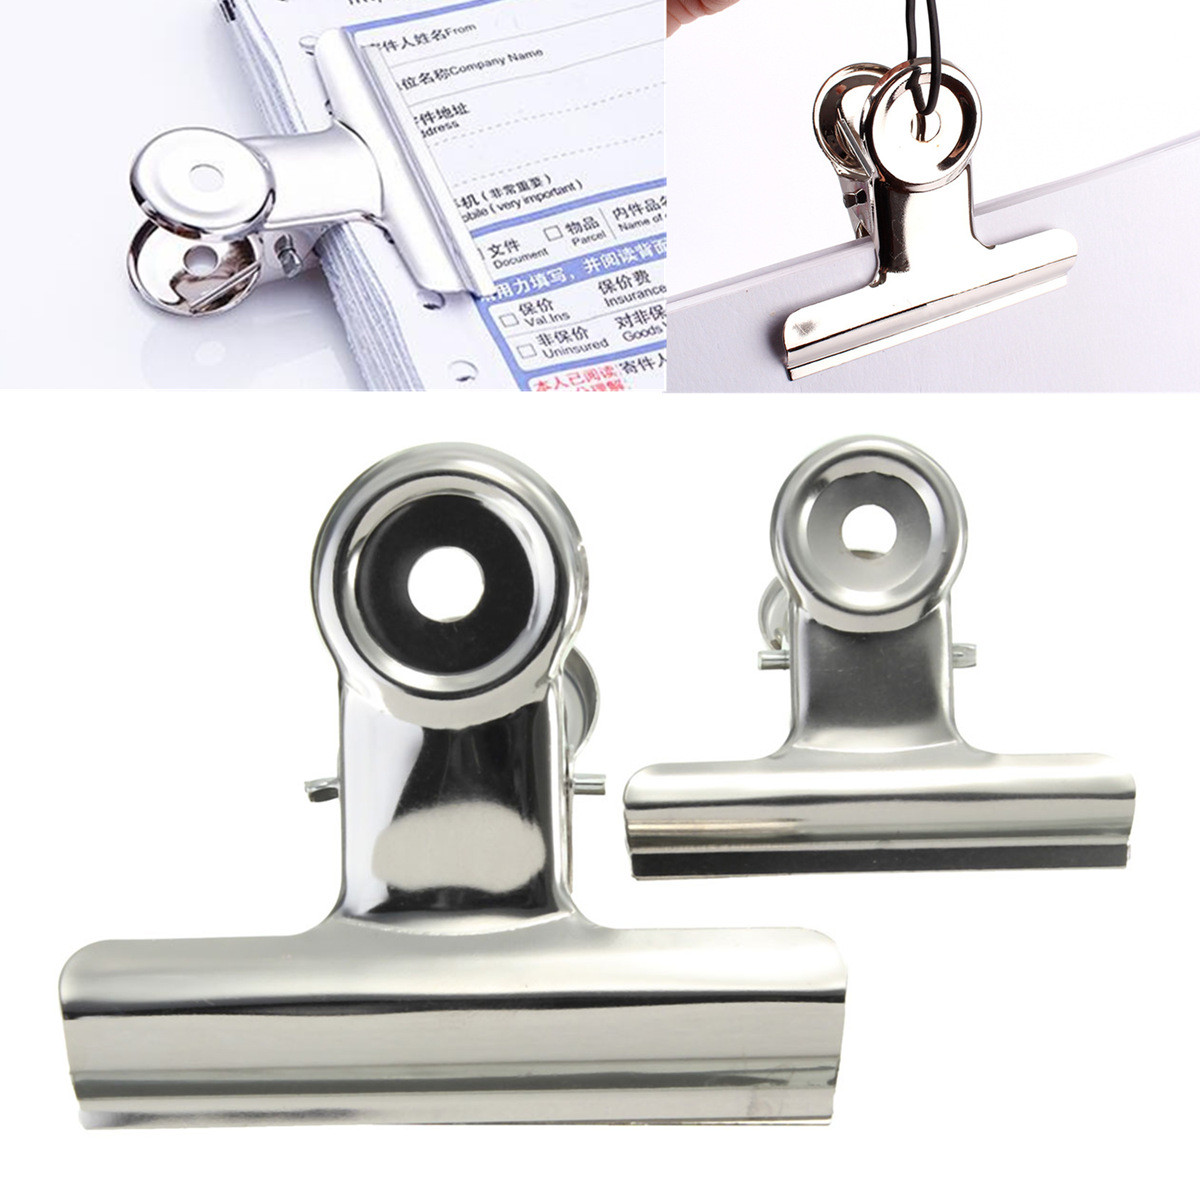 Details about   5x Bulldog Letter Clips Stainless Steel Paper File Binder Clip Office Supp^qi 